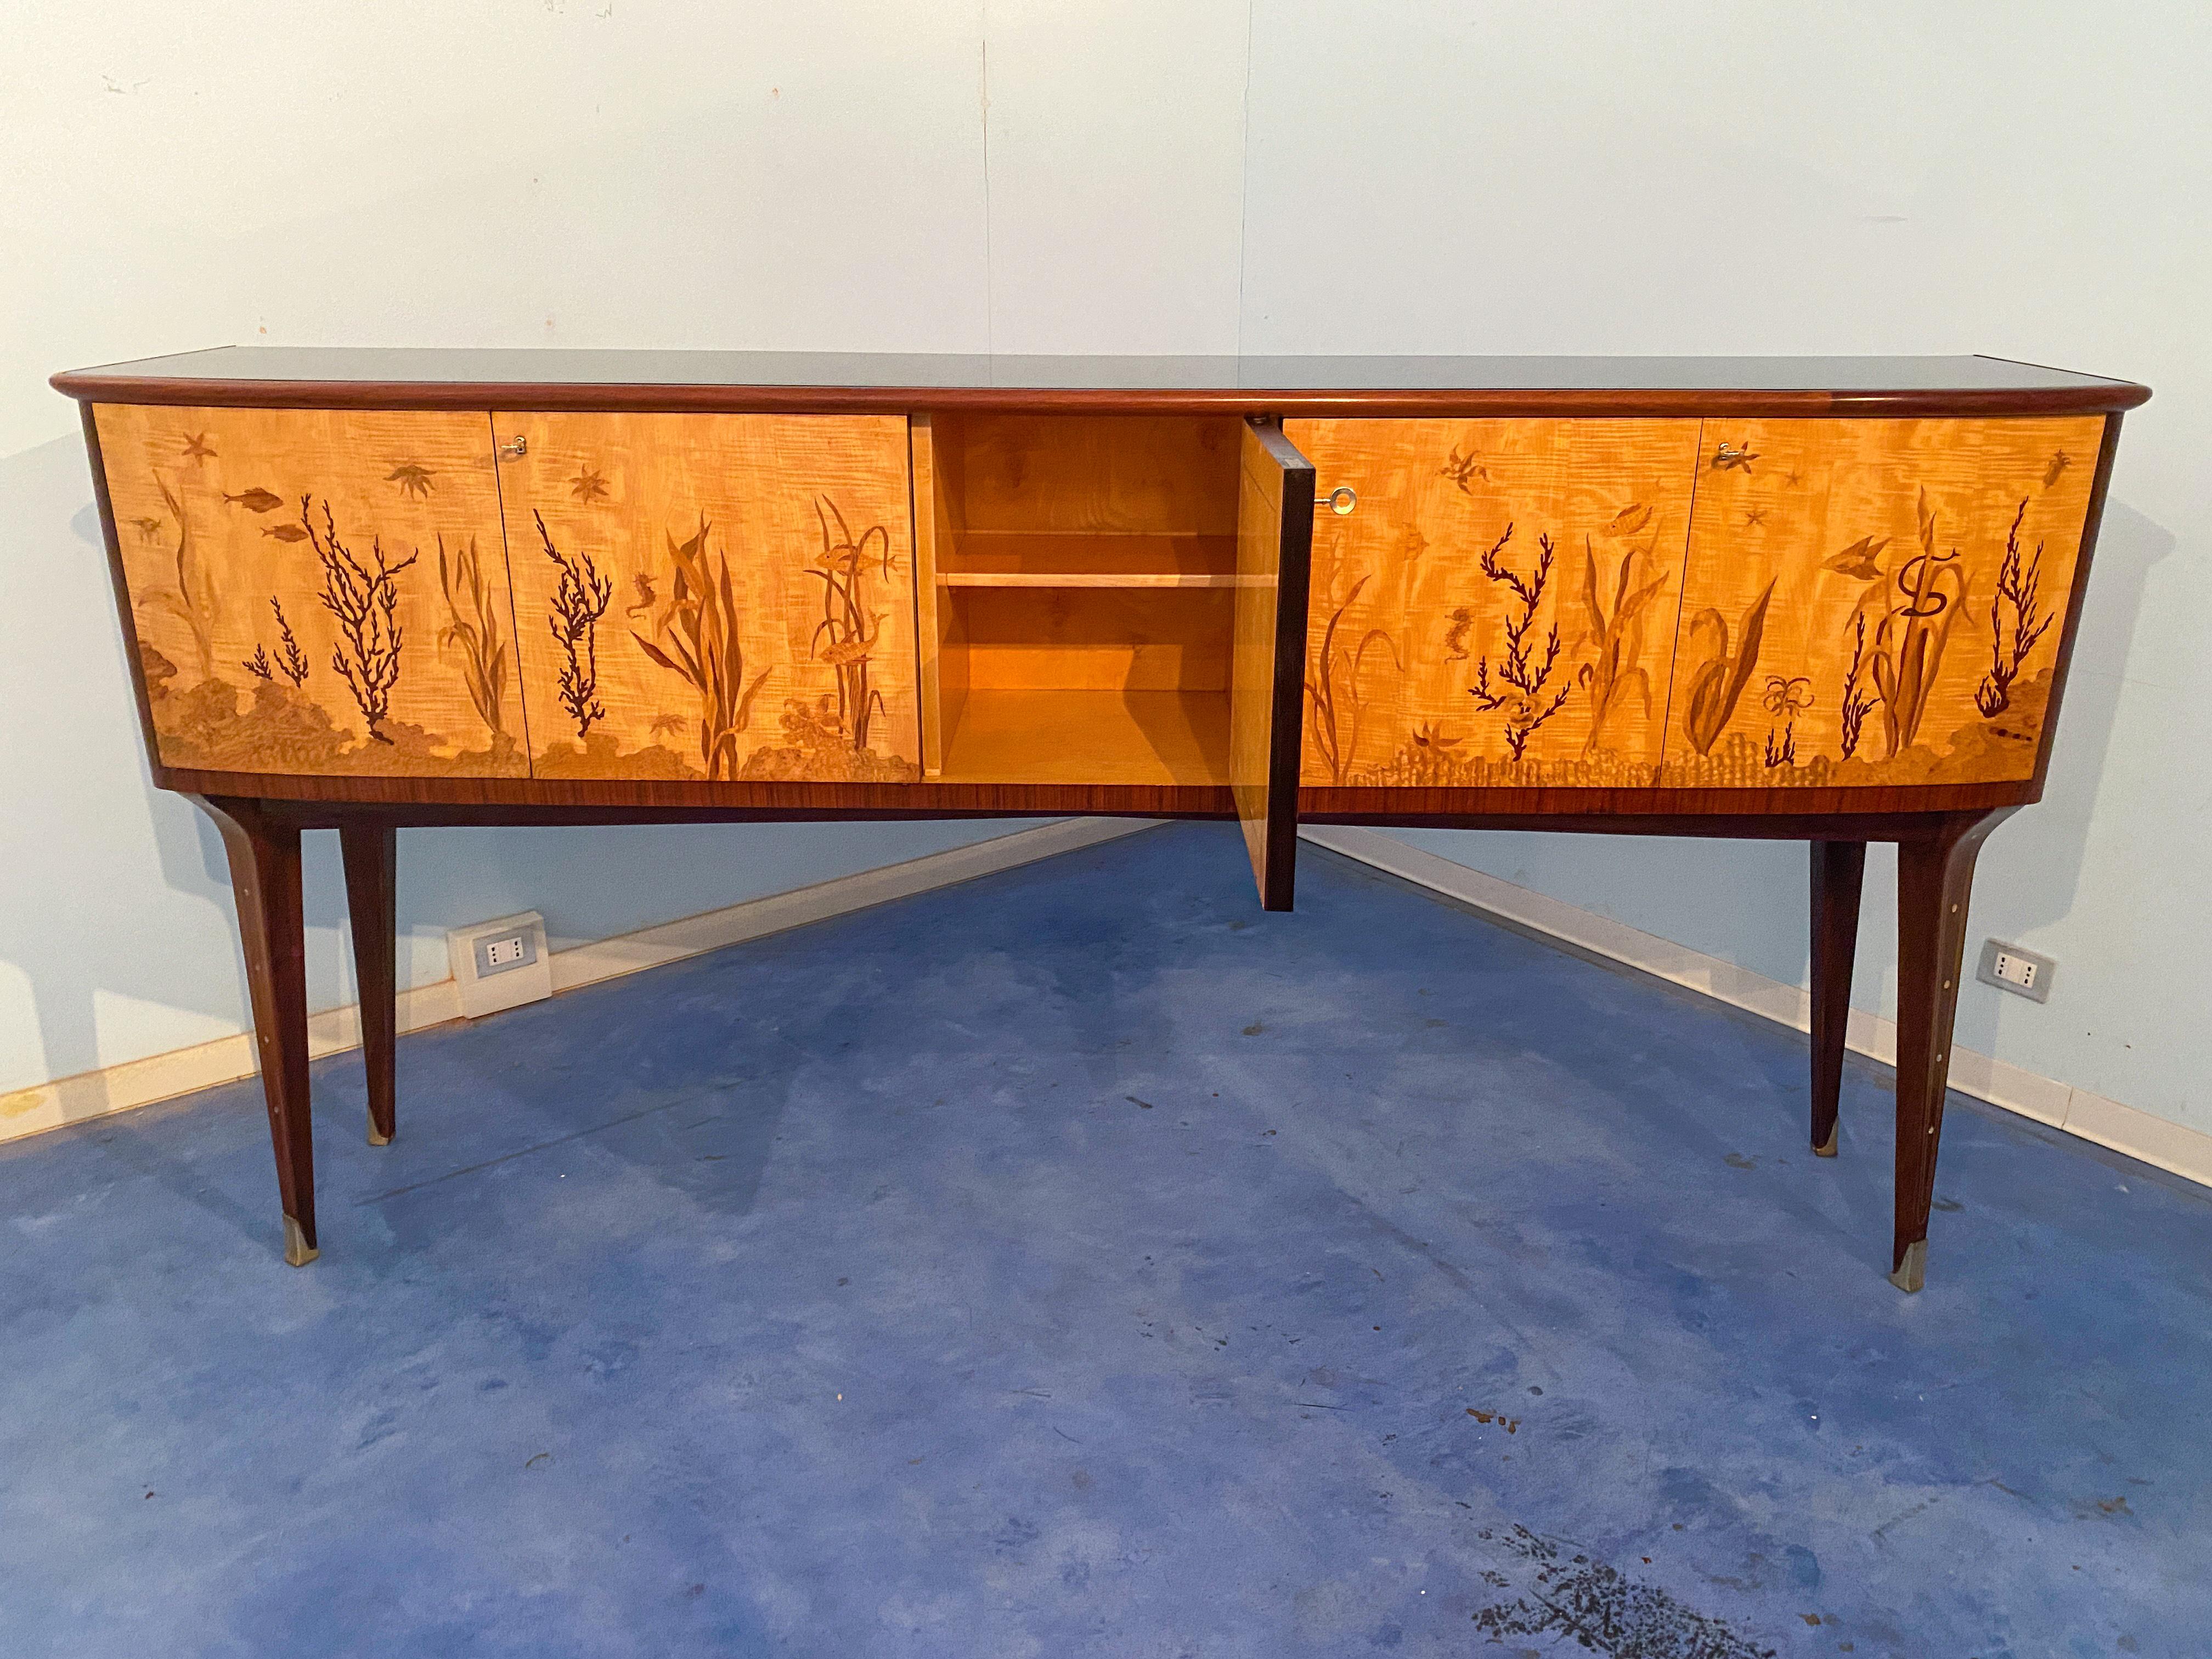 Brass Italian Midcentury Inlaid Maple Sideboard by Andrea Gusmai, 1950s For Sale